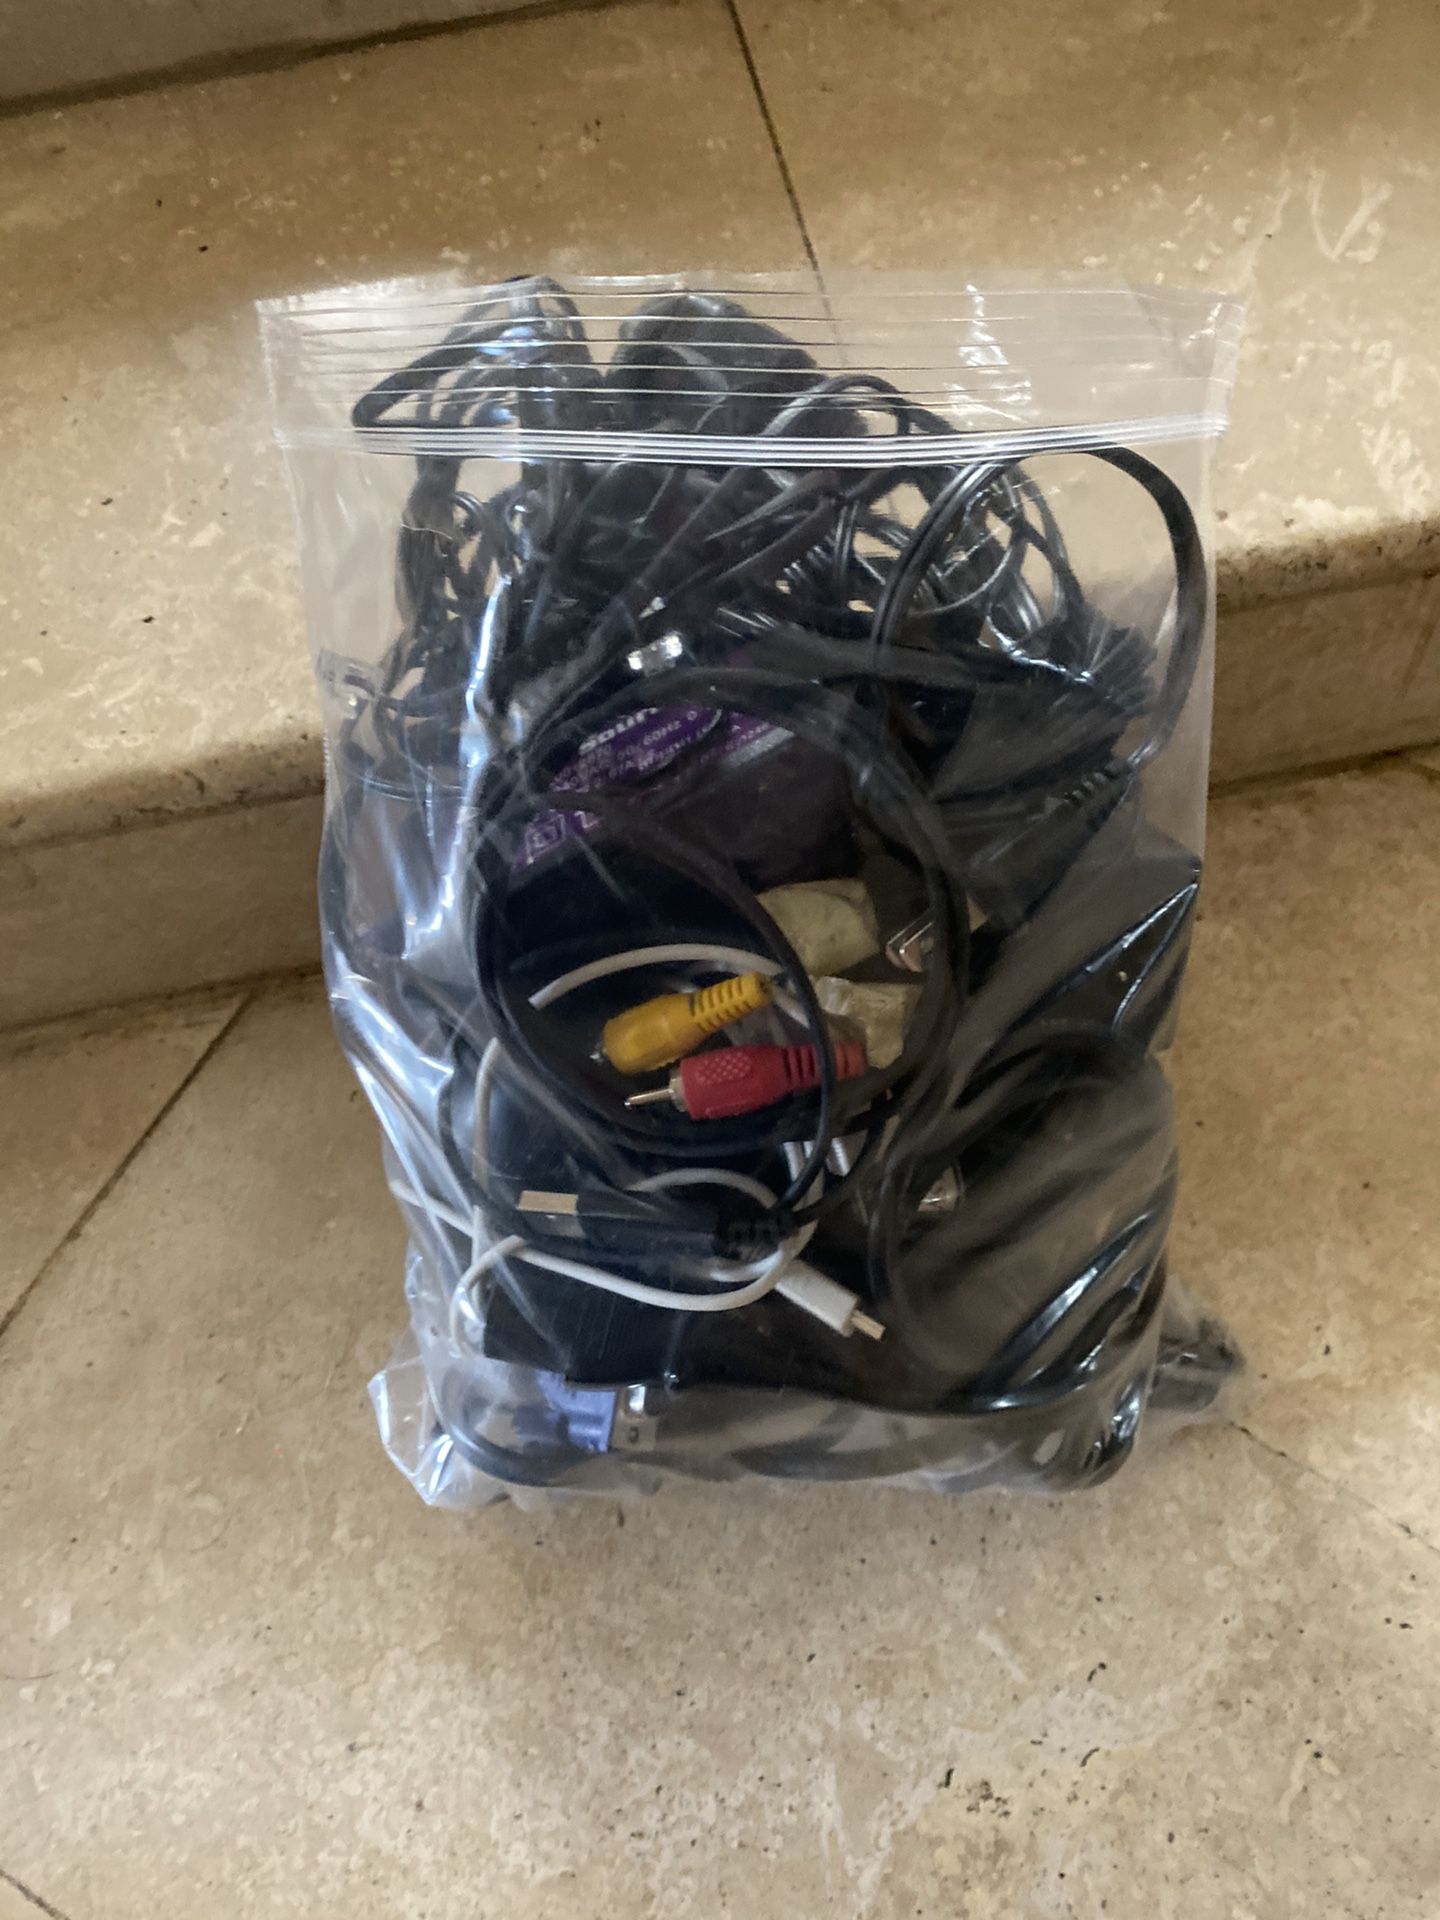 Bag of misc wires